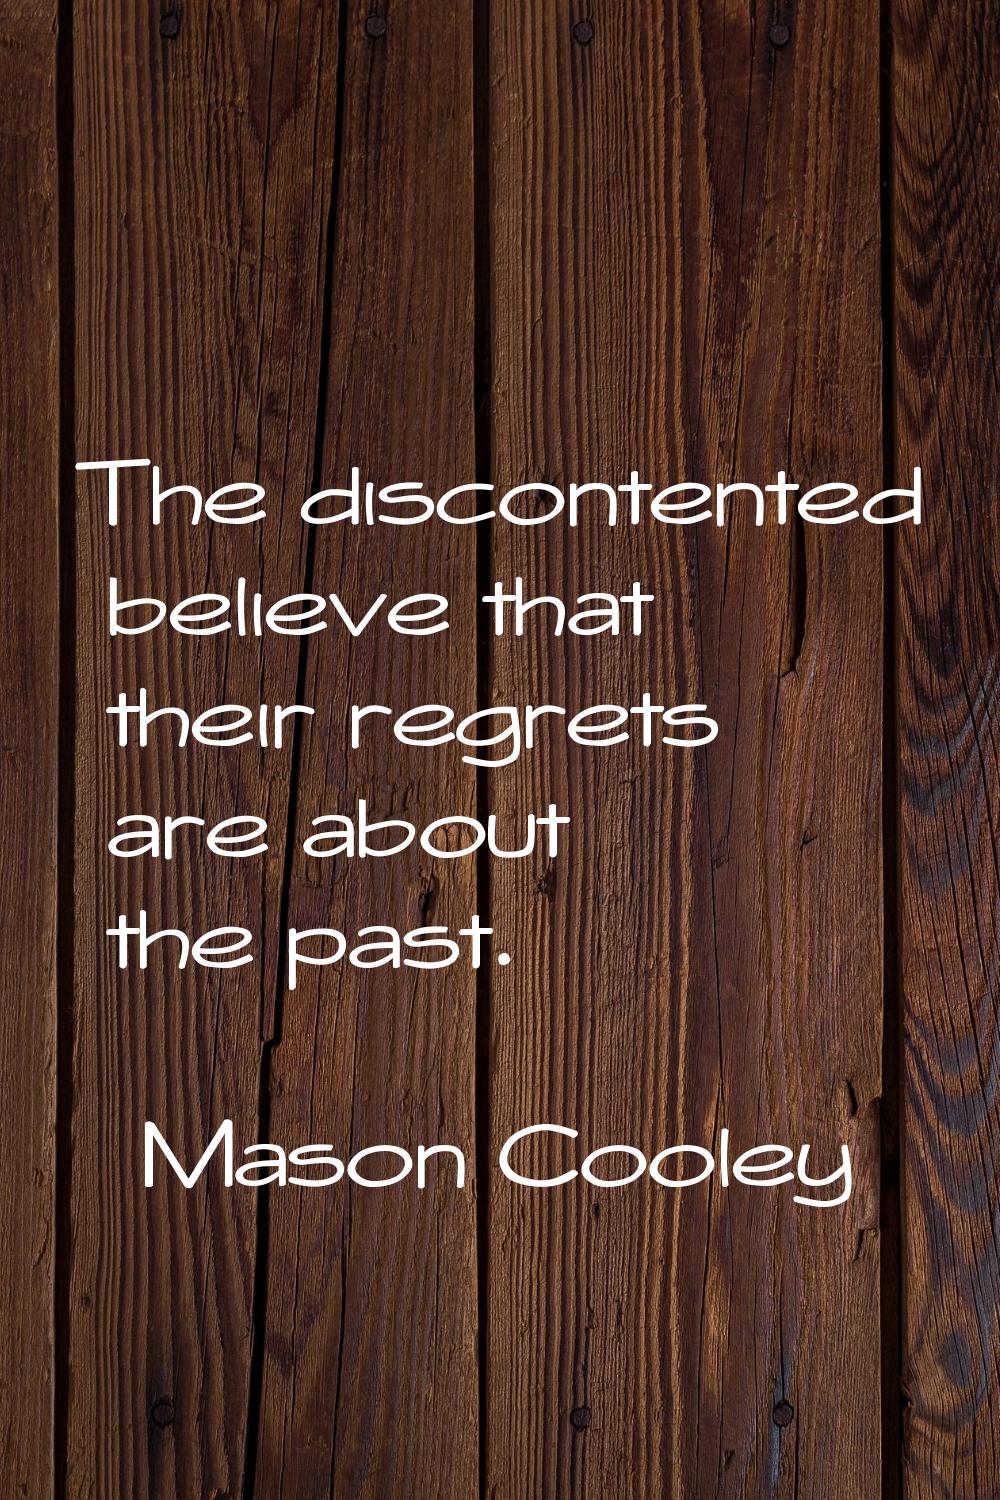 The discontented believe that their regrets are about the past.